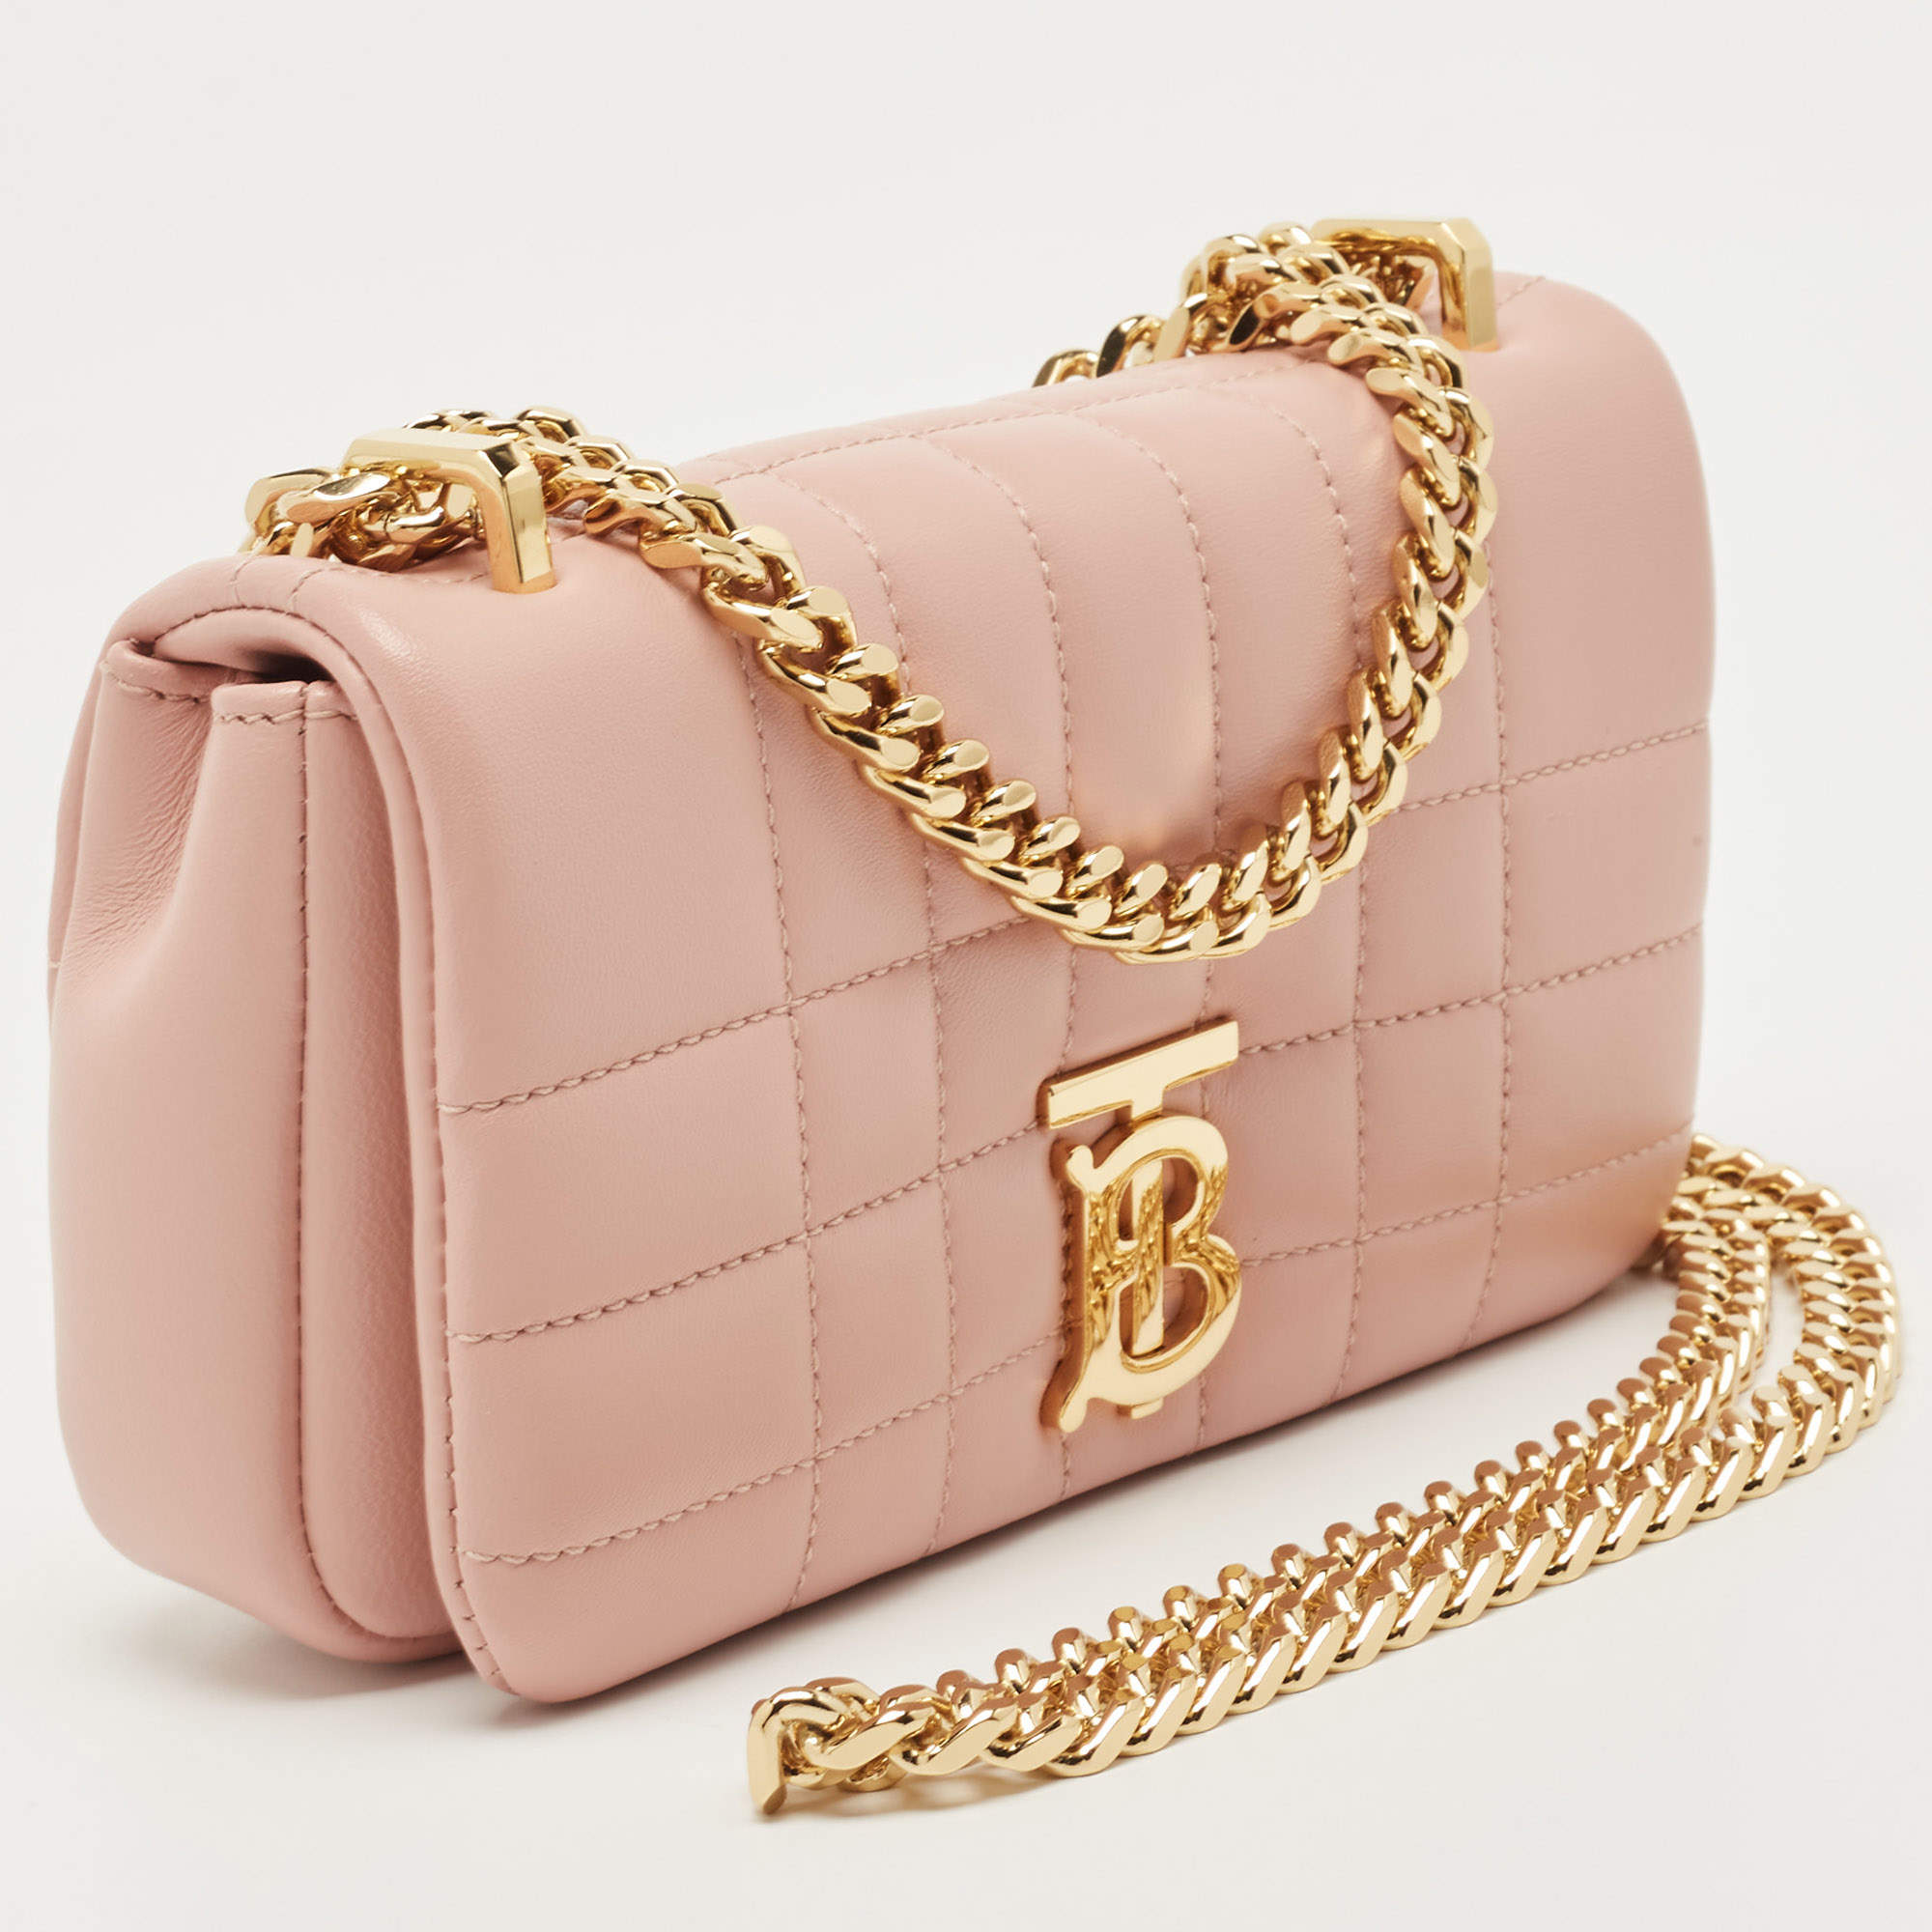 Burberry Small Quilted Tri-Tone Lola Bag- Red/Pink/Camel